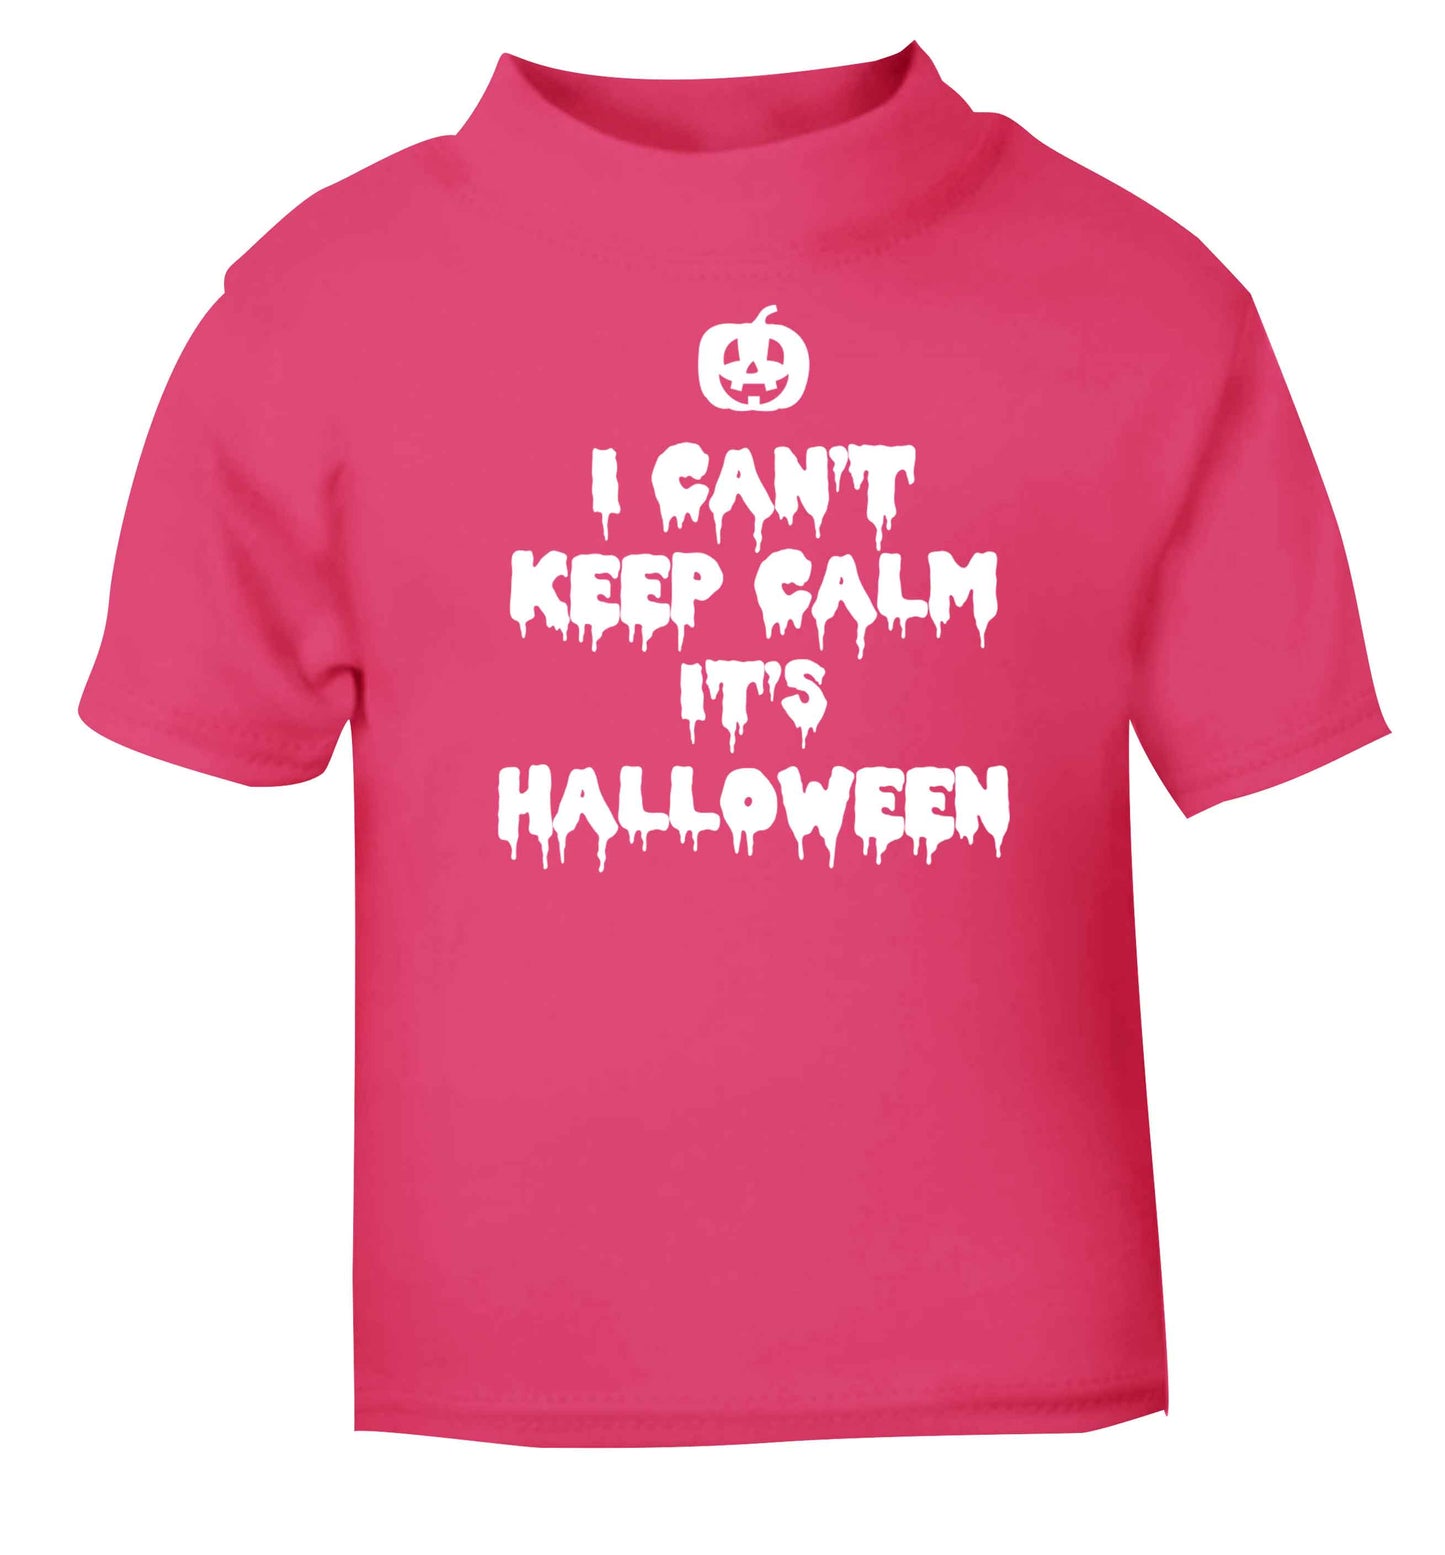 I can't keep calm it's halloween pink baby toddler Tshirt 2 Years